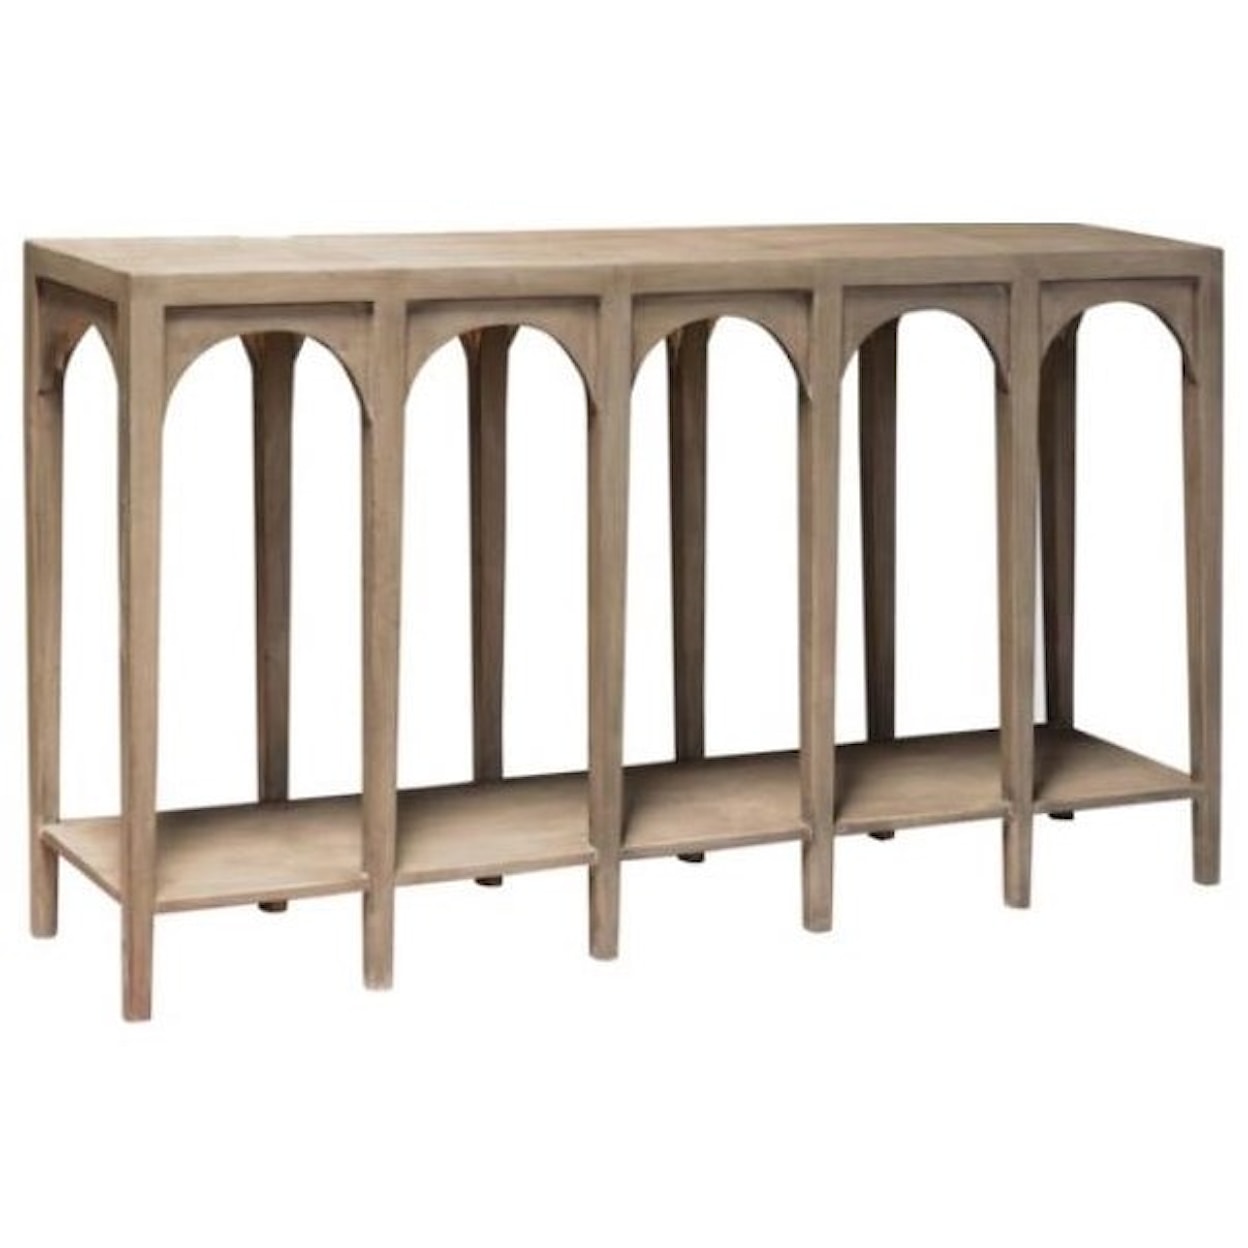 Crestview Collection Accent Furniture Arch Console